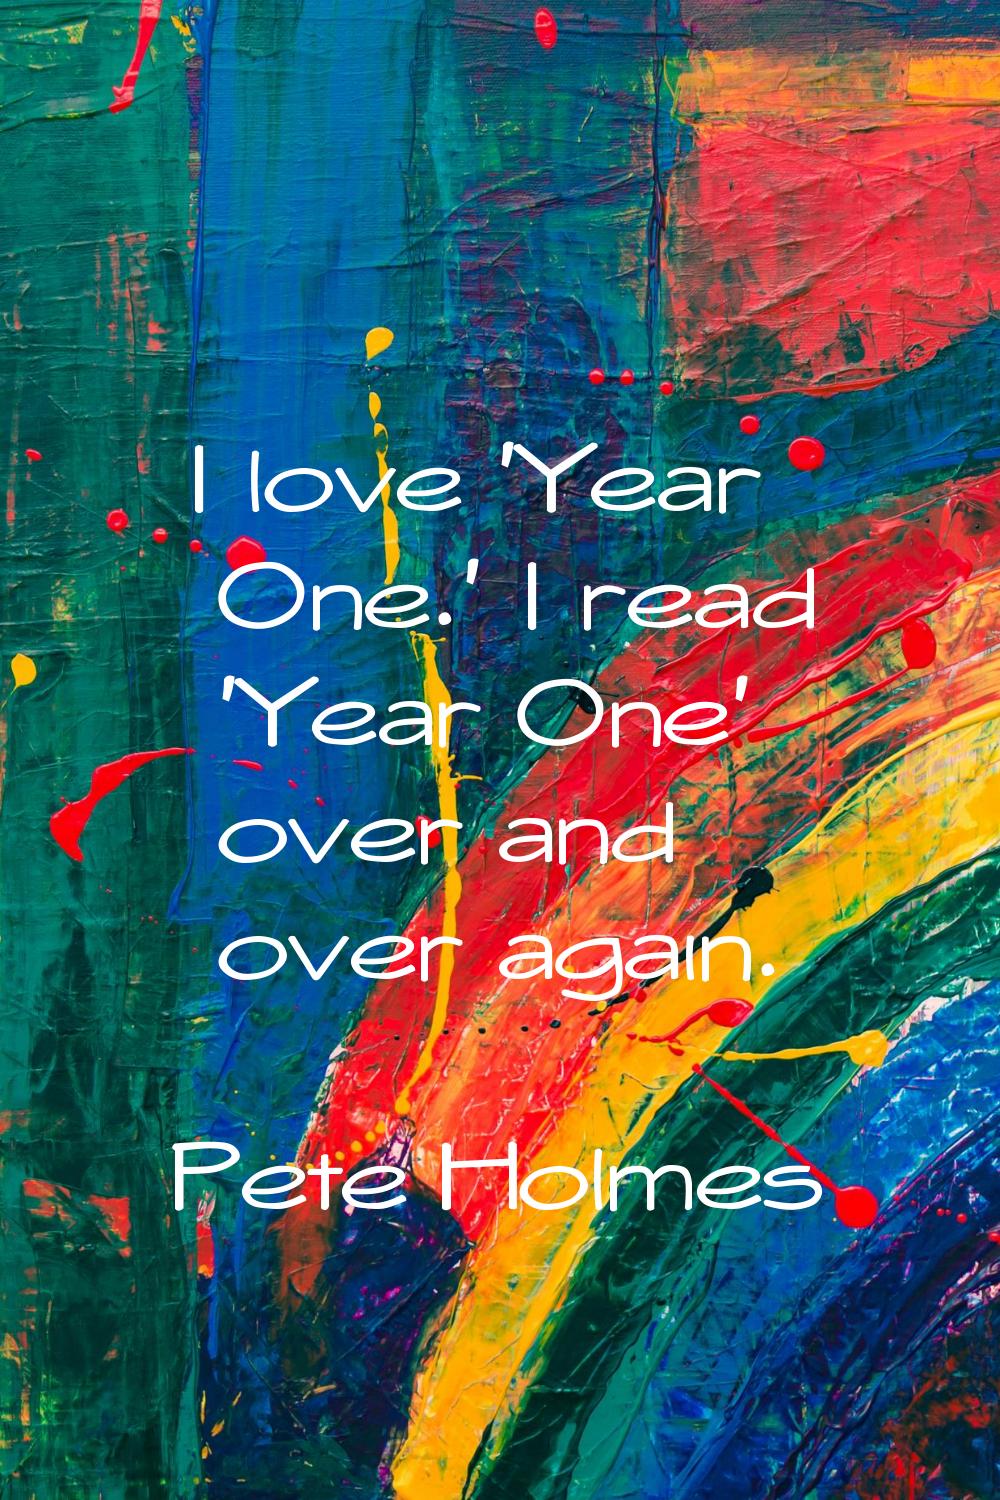 I love 'Year One.' I read 'Year One' over and over again.